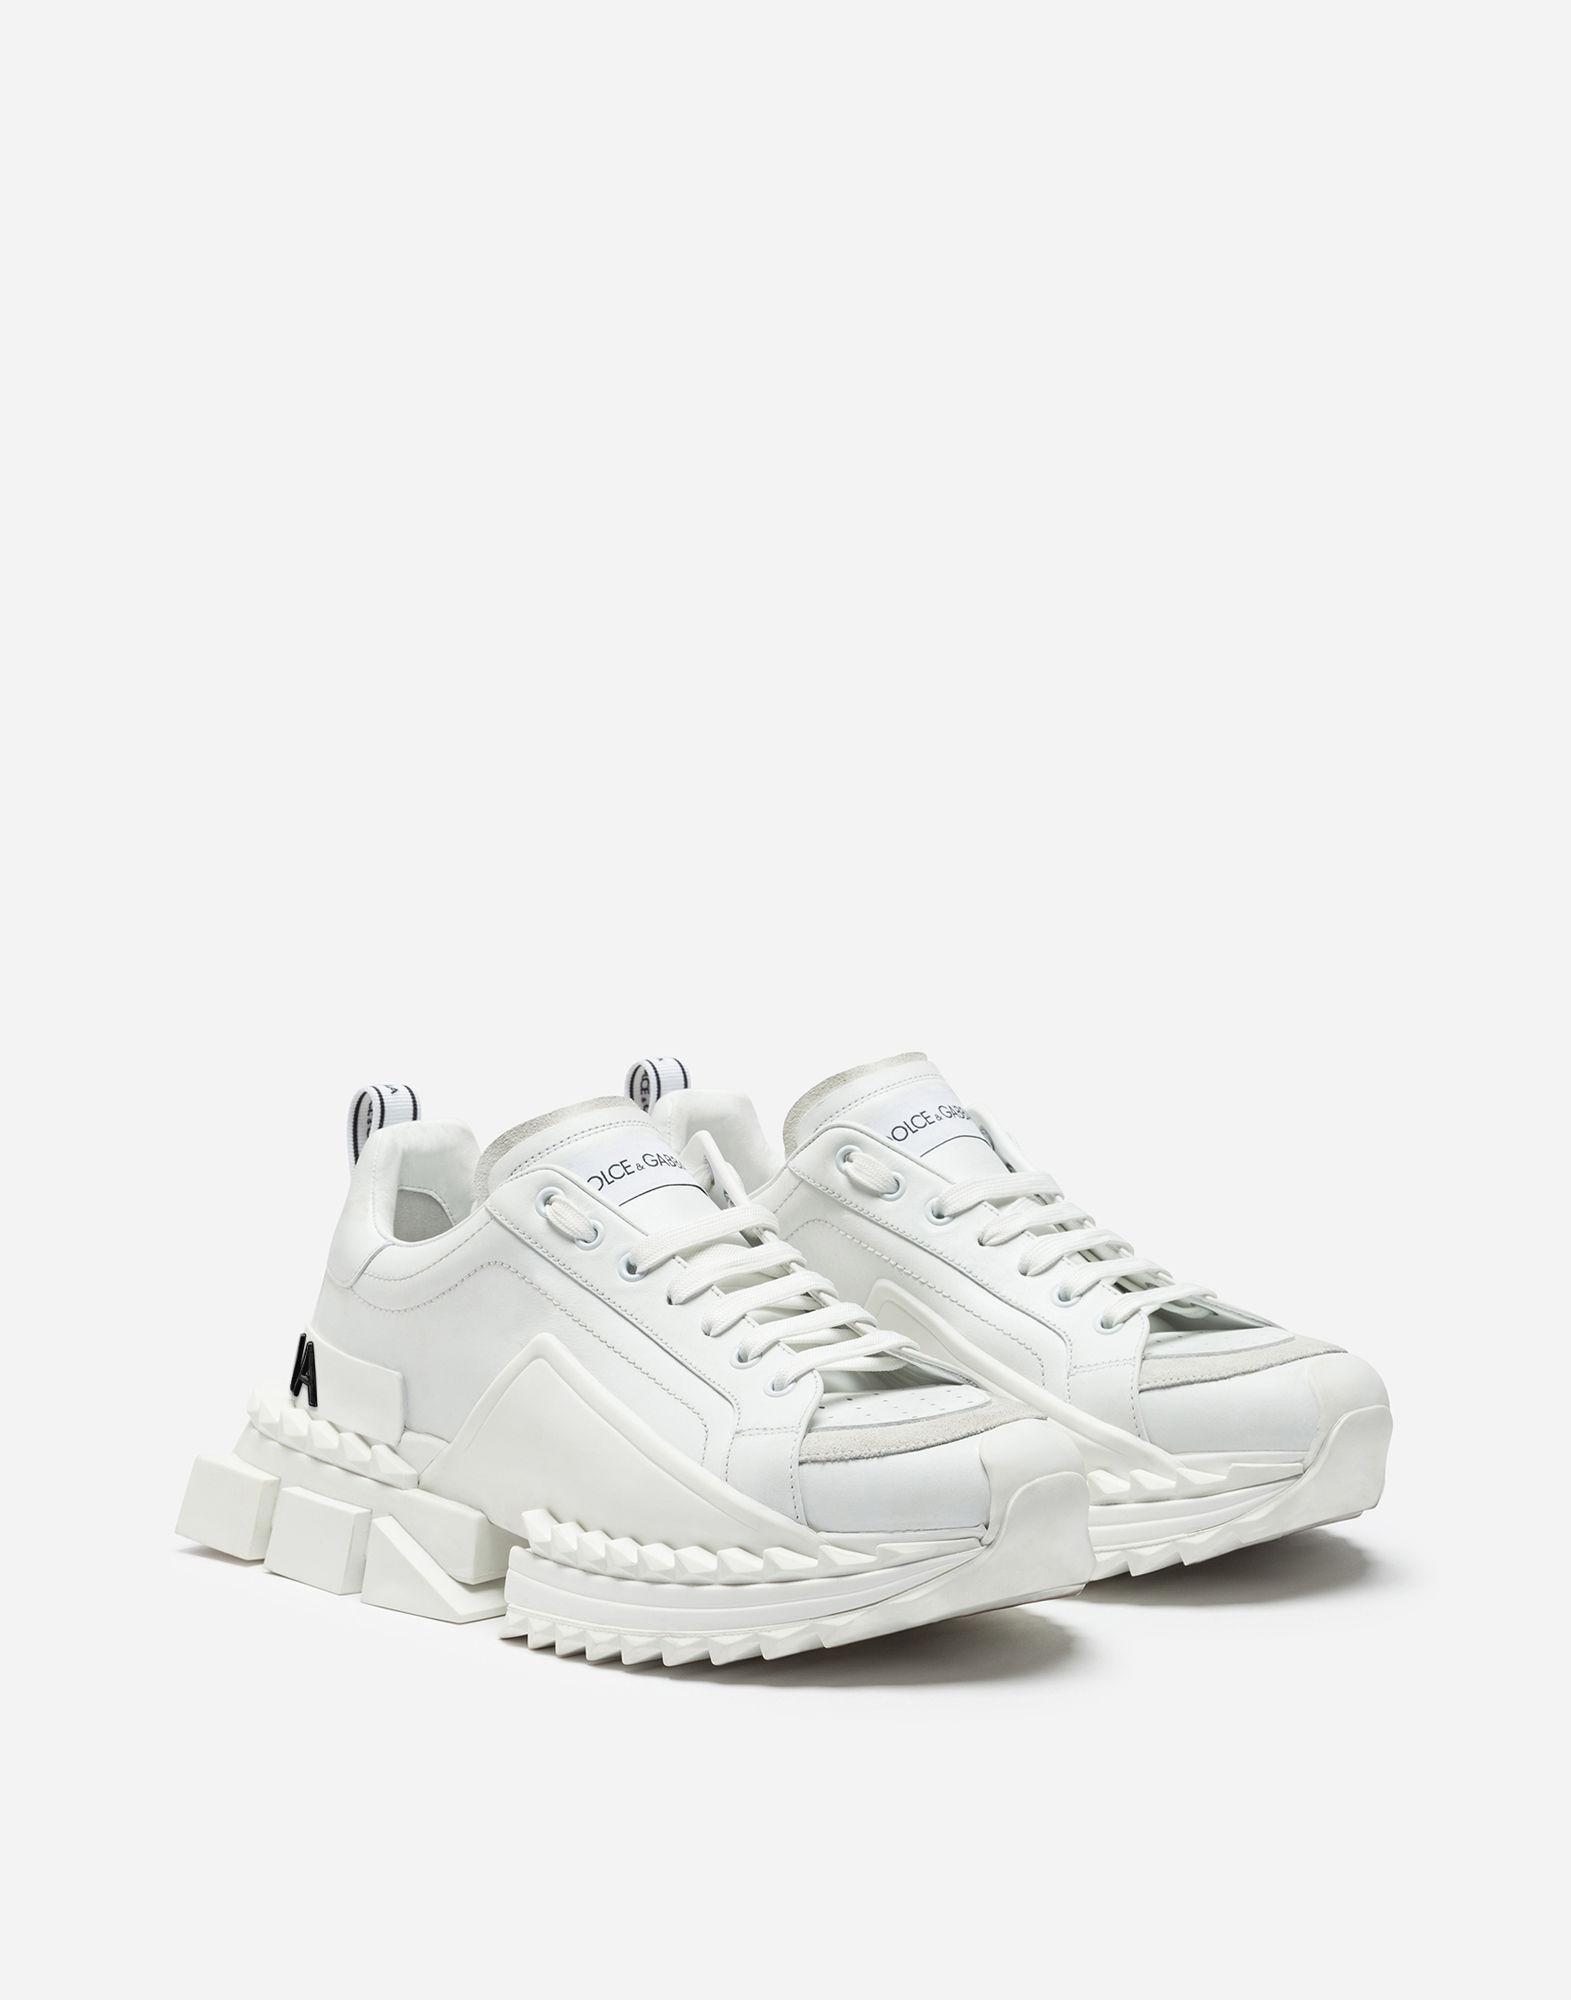 Dolce & Gabbana Leather Super Queen Sneakers in White - Lyst